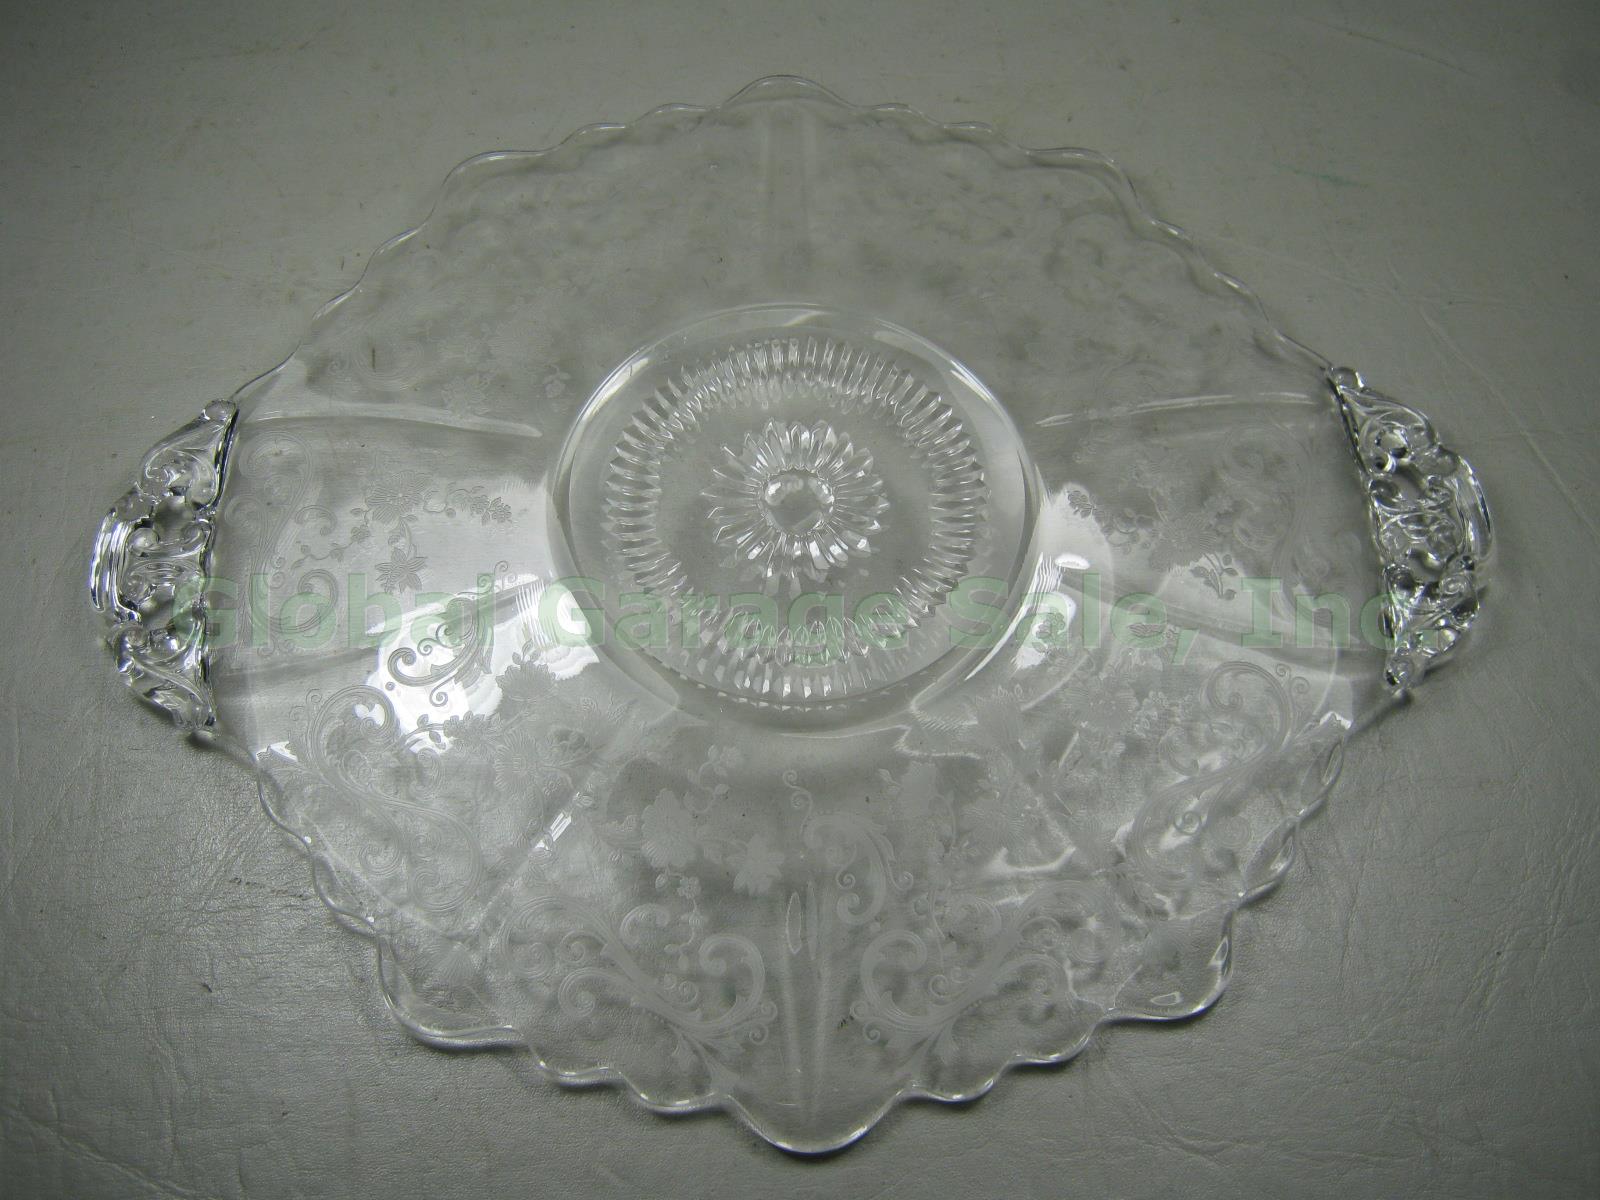 Cambridge Chantilly Etched Glass Serving Bowl Dish Handled Cake Plate Platter NR 3